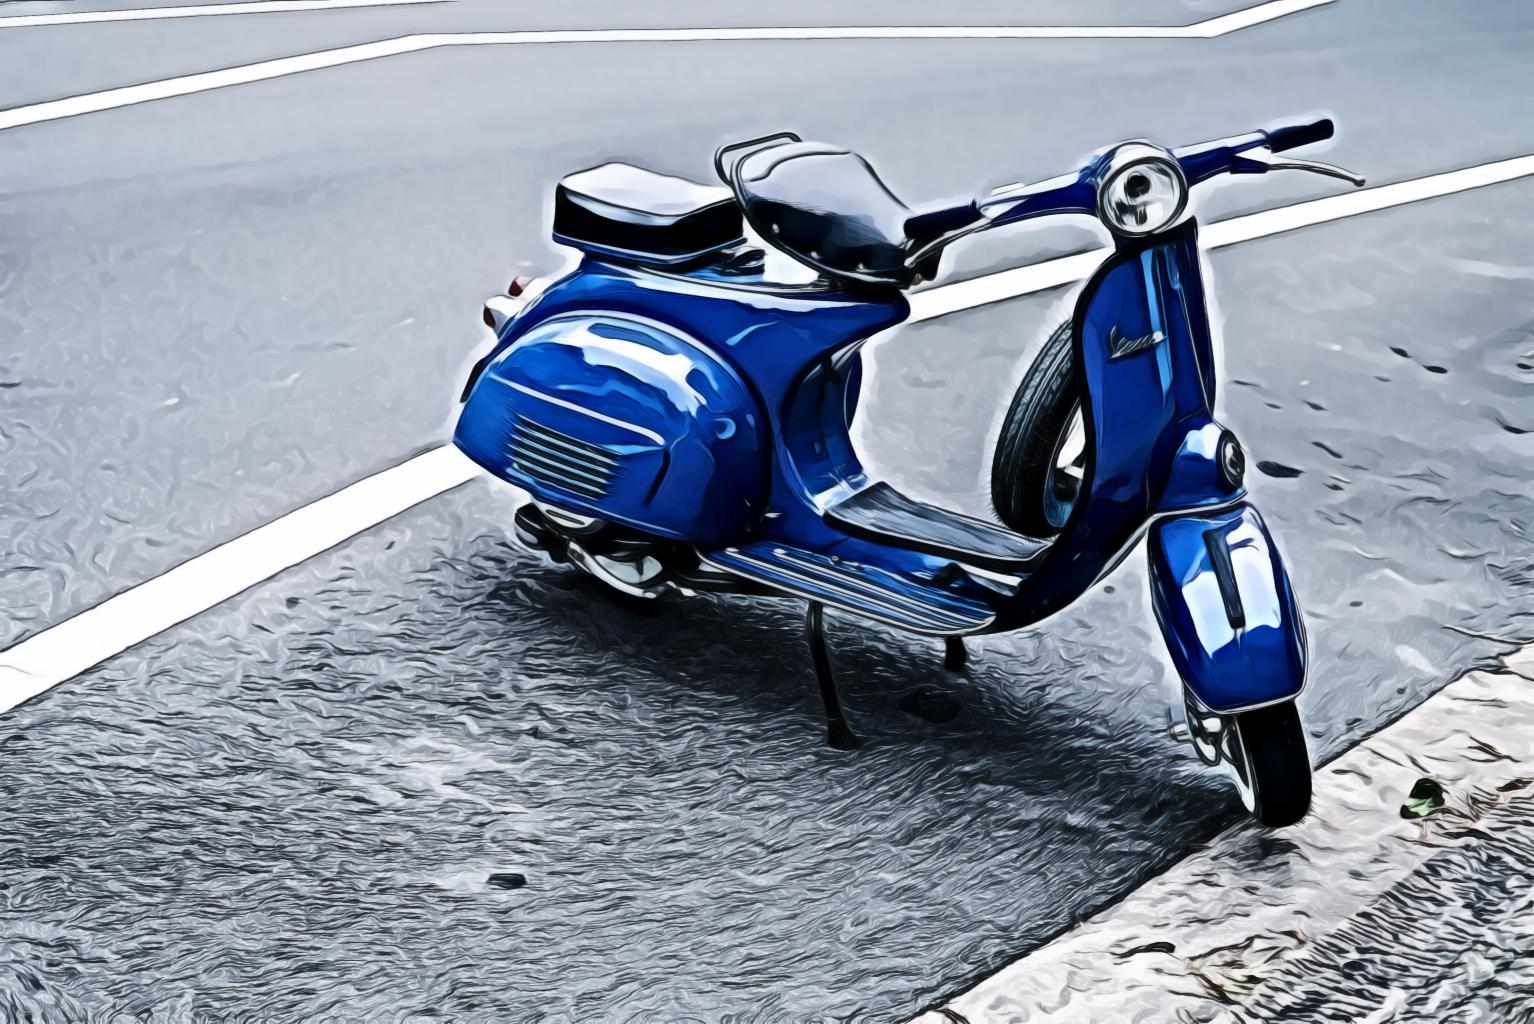 Parked Blue Motor Scooter